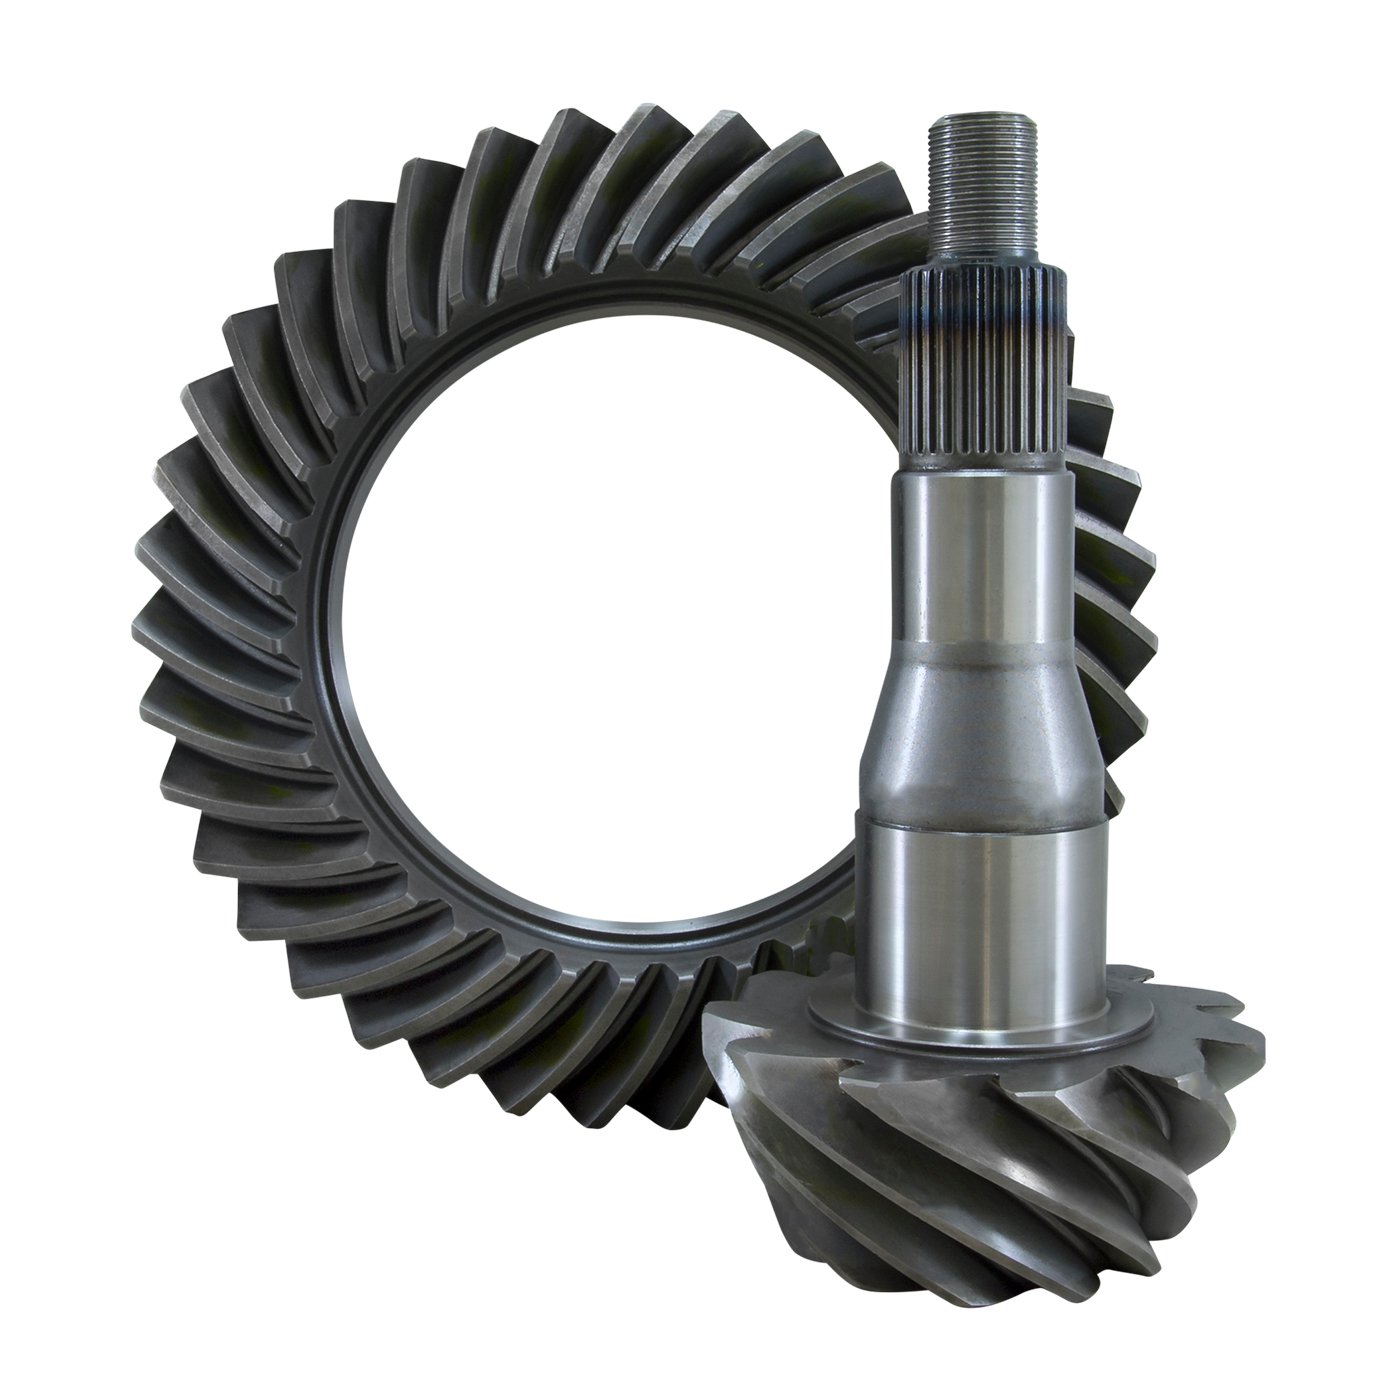 USA Standard 36293 Ring & Pinion Gear Set, For '11 & Up Ford 9.75 in., 3.55 Ratio